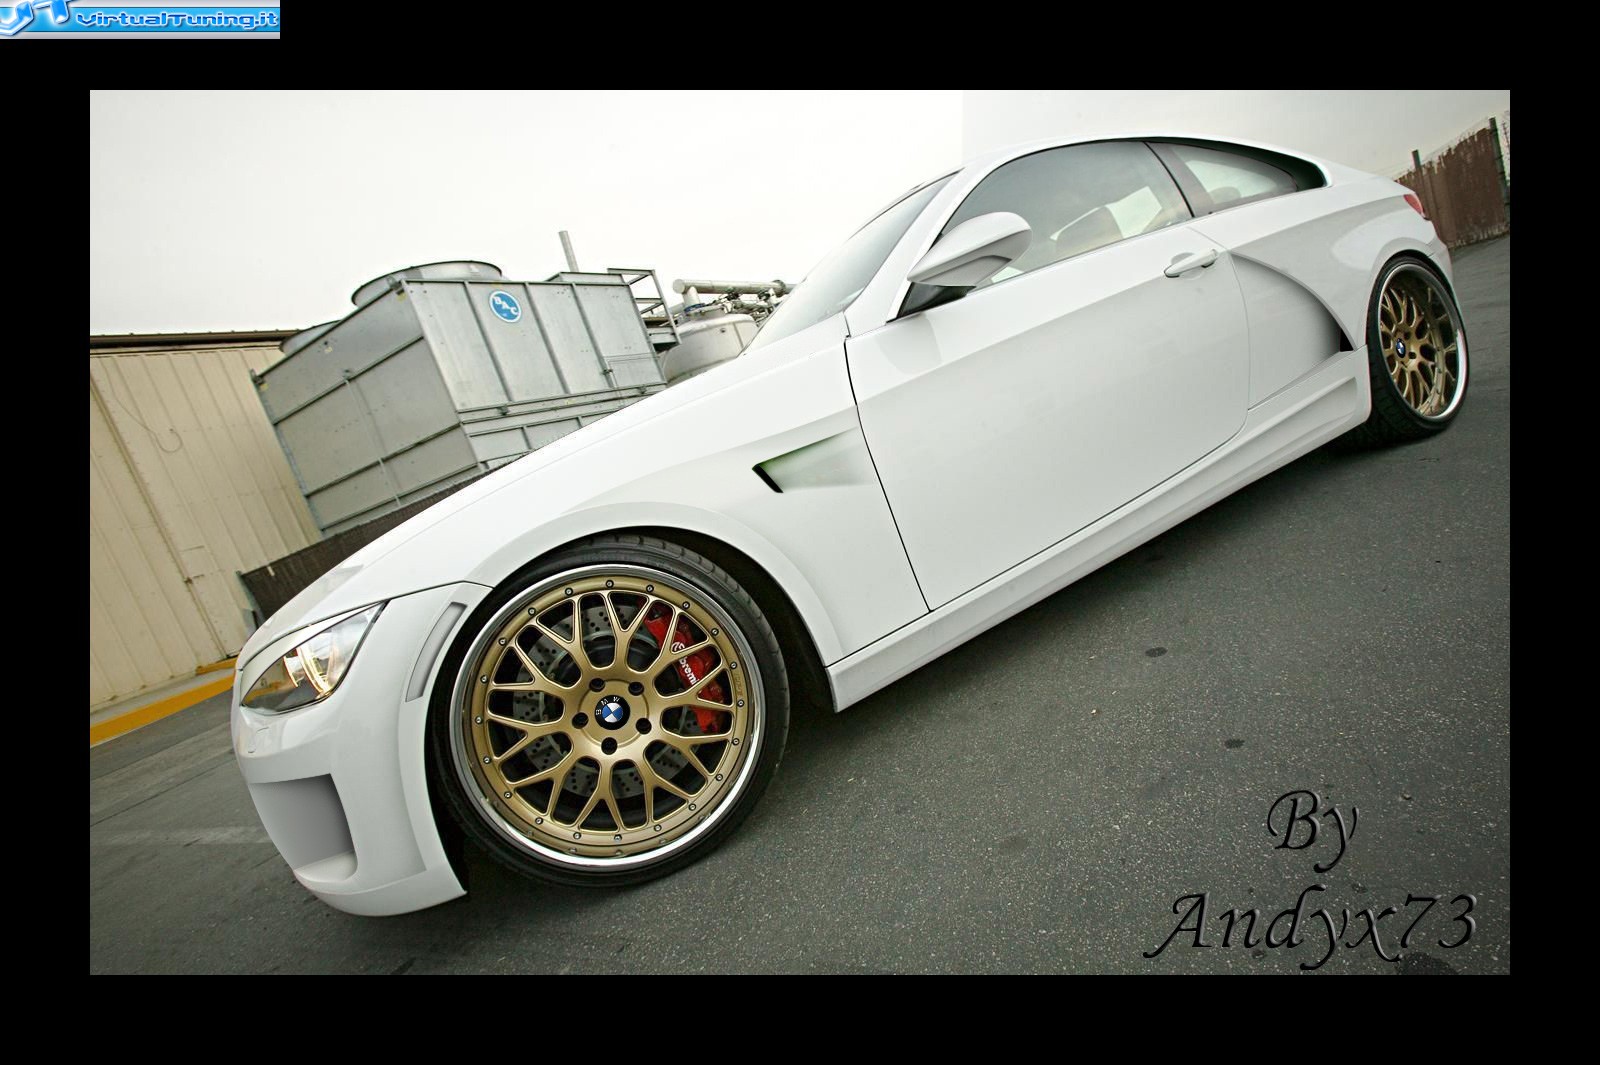 VirtualTuning BMW Serie 3 Coupé by andyx73